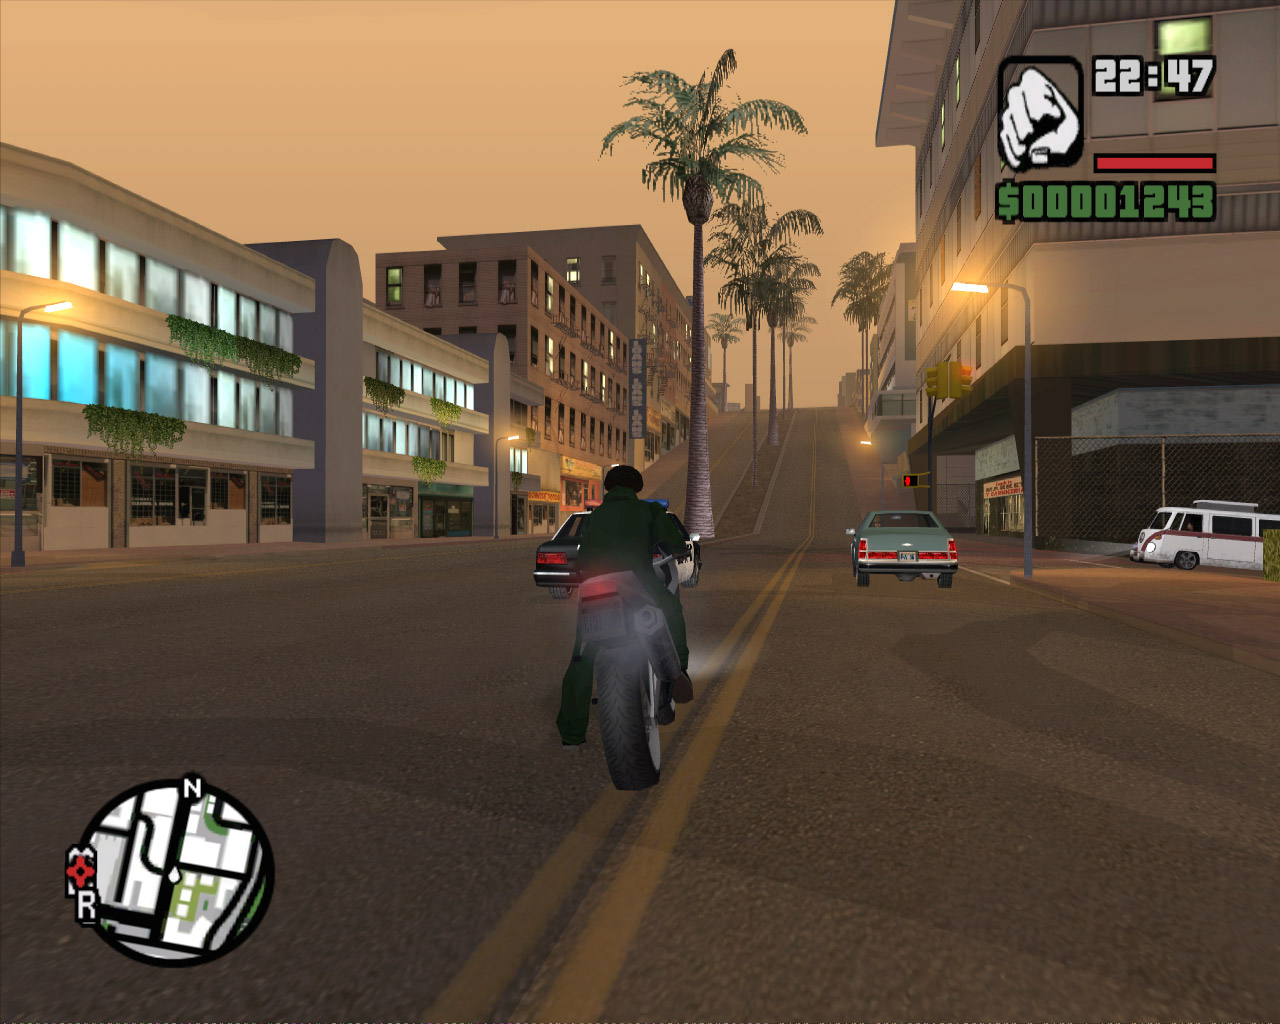 Grand Theft Auto: San Andreas - Apps on Google Play